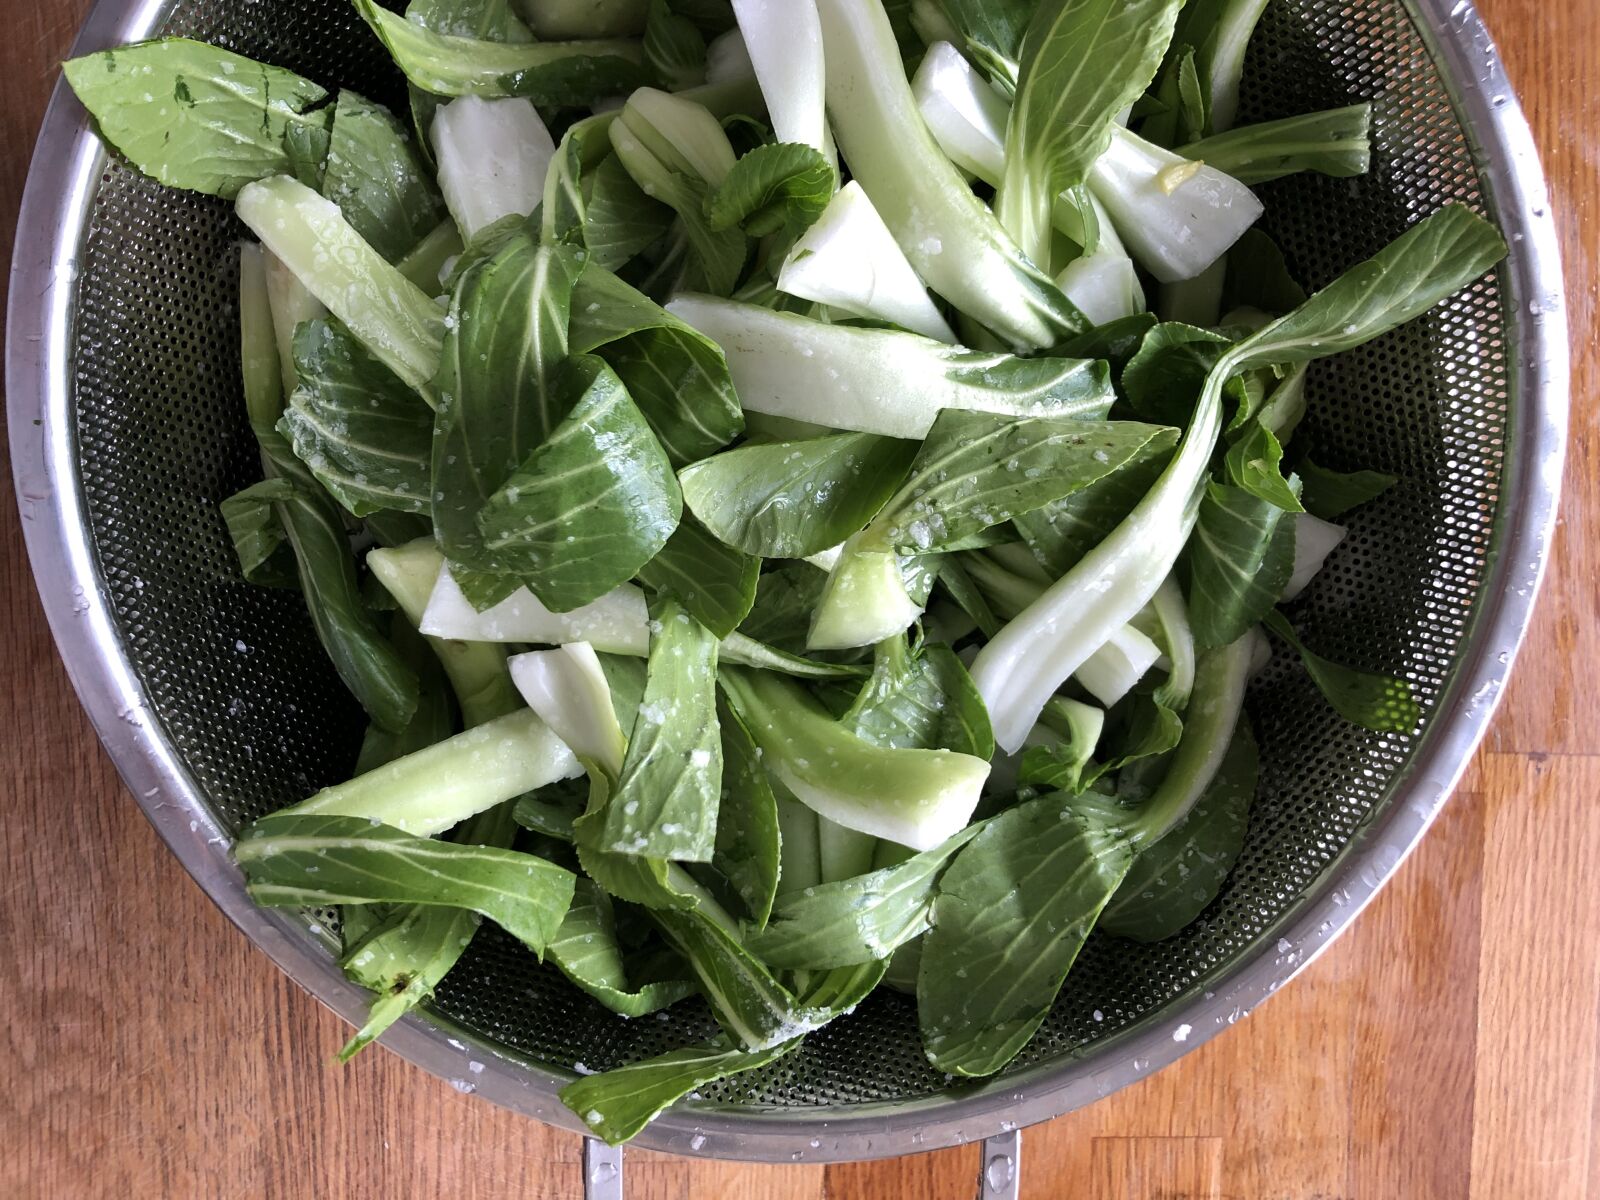 Apple iPhone X sample photo. Bok choy, greens, cabbage photography